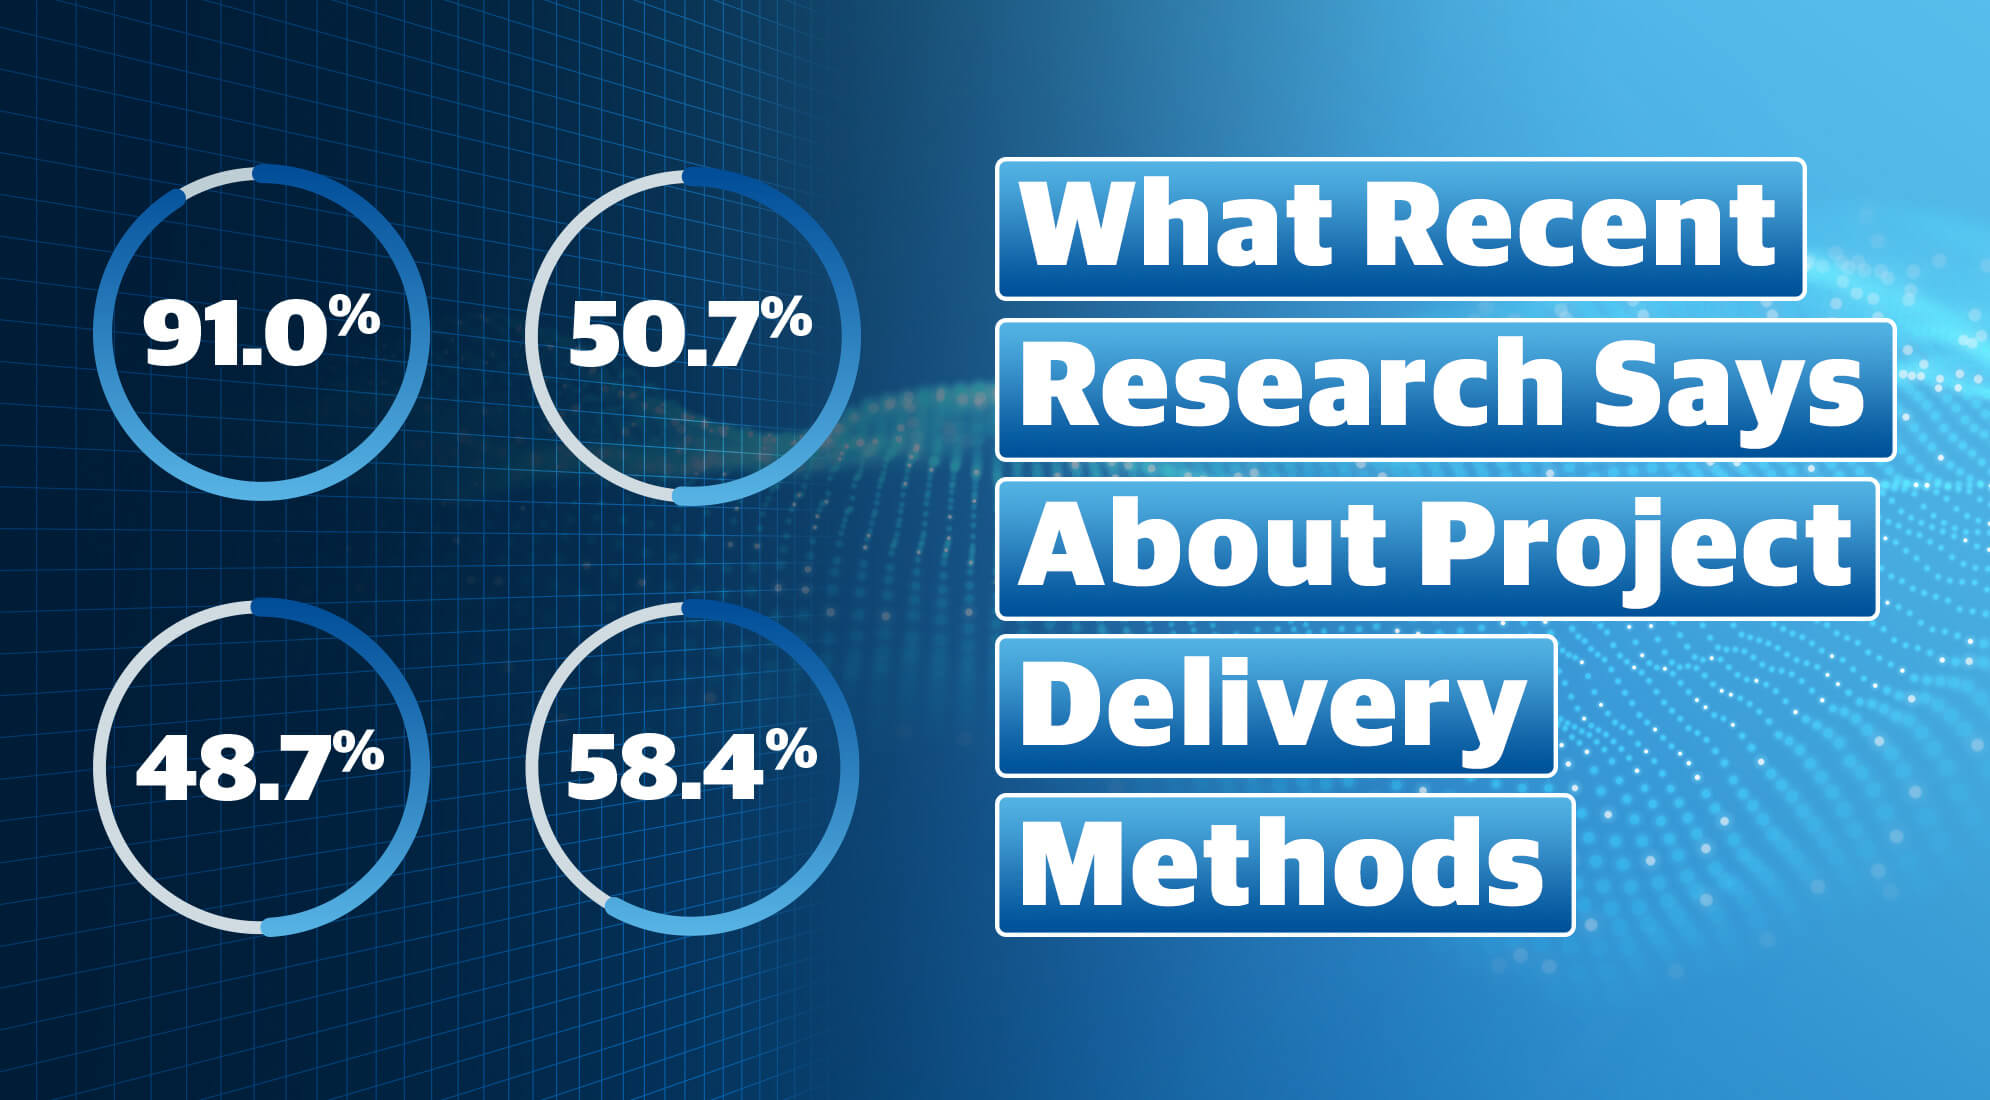 See a summary of recent research into project delivery methods.